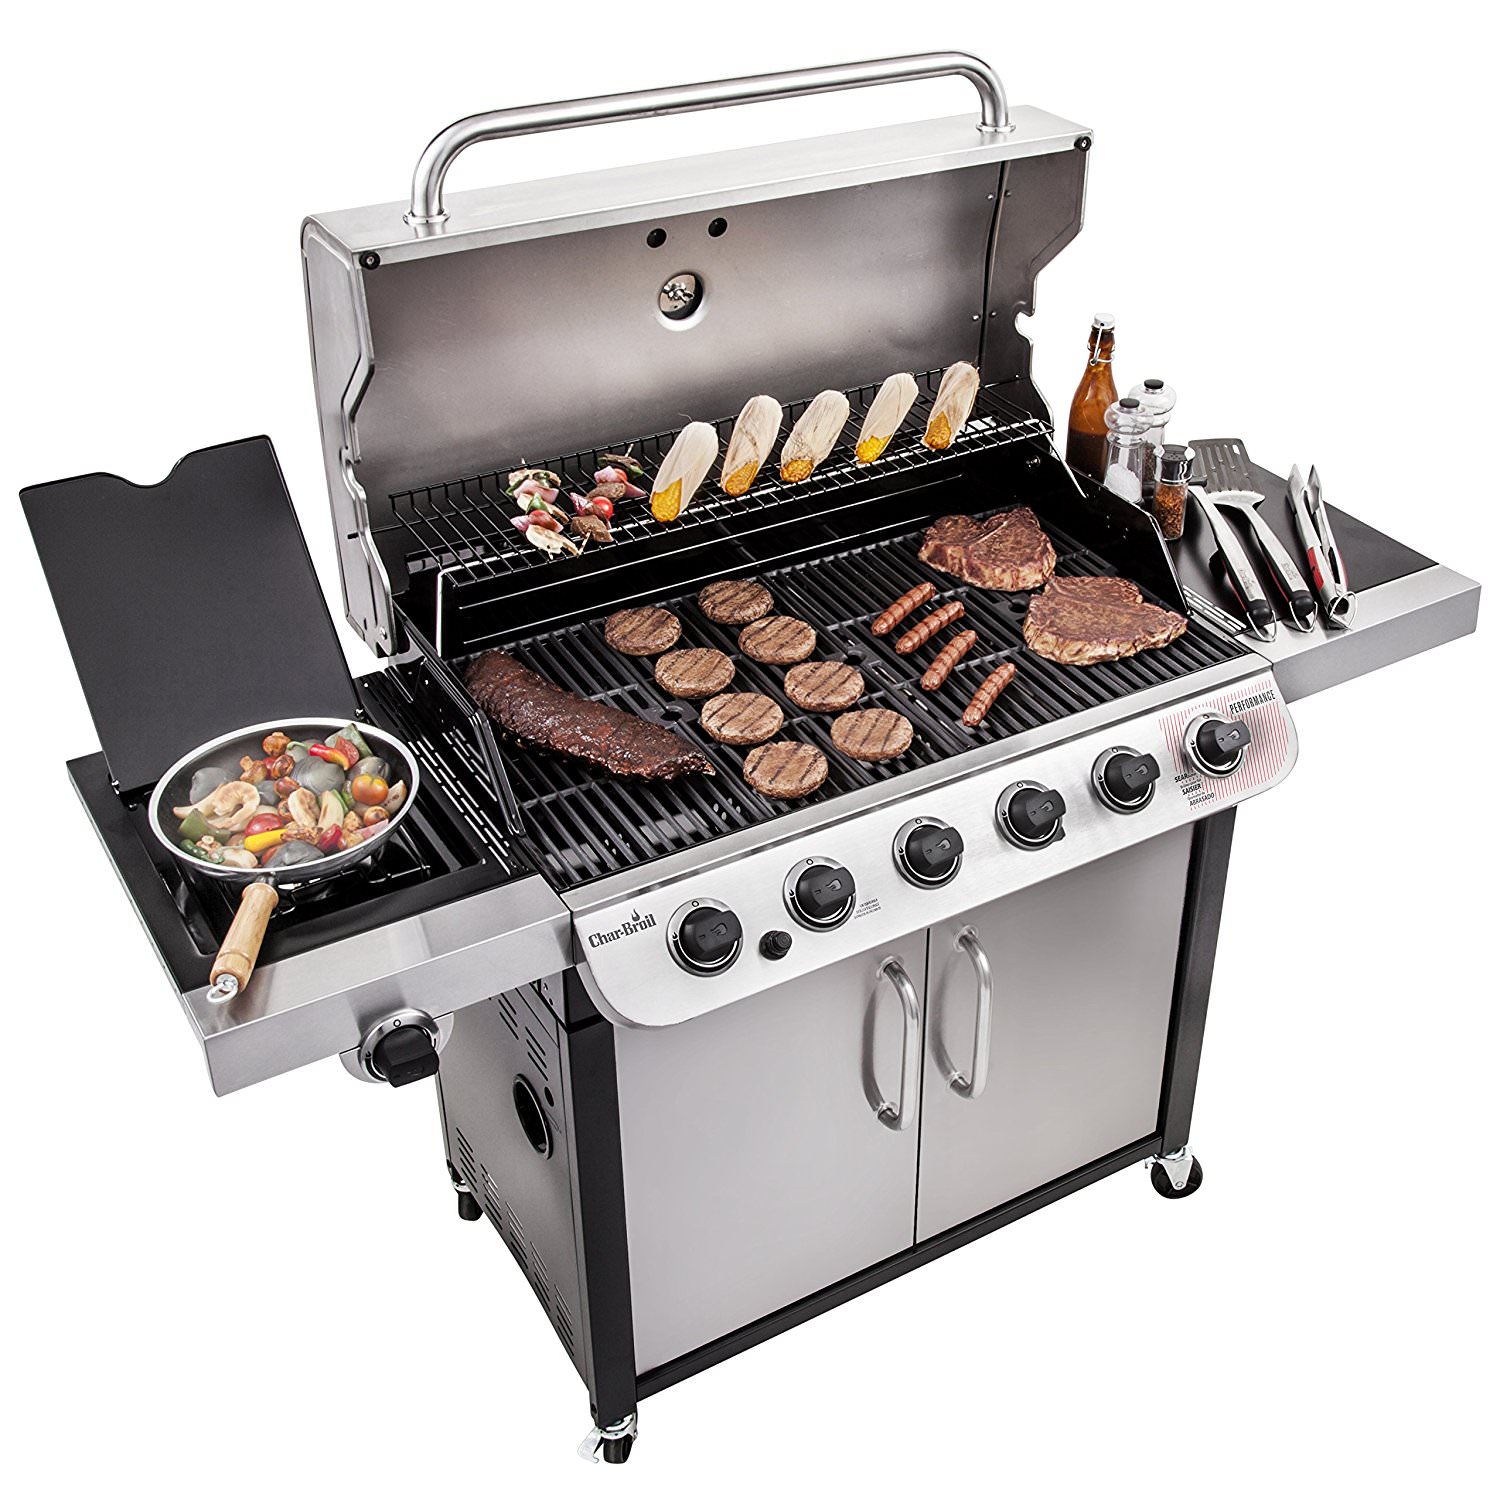 Char-Broil Performance Series 6-burner Liquid Propane Gas Grill with Side Burner, Black & Stainless - image 5 of 11